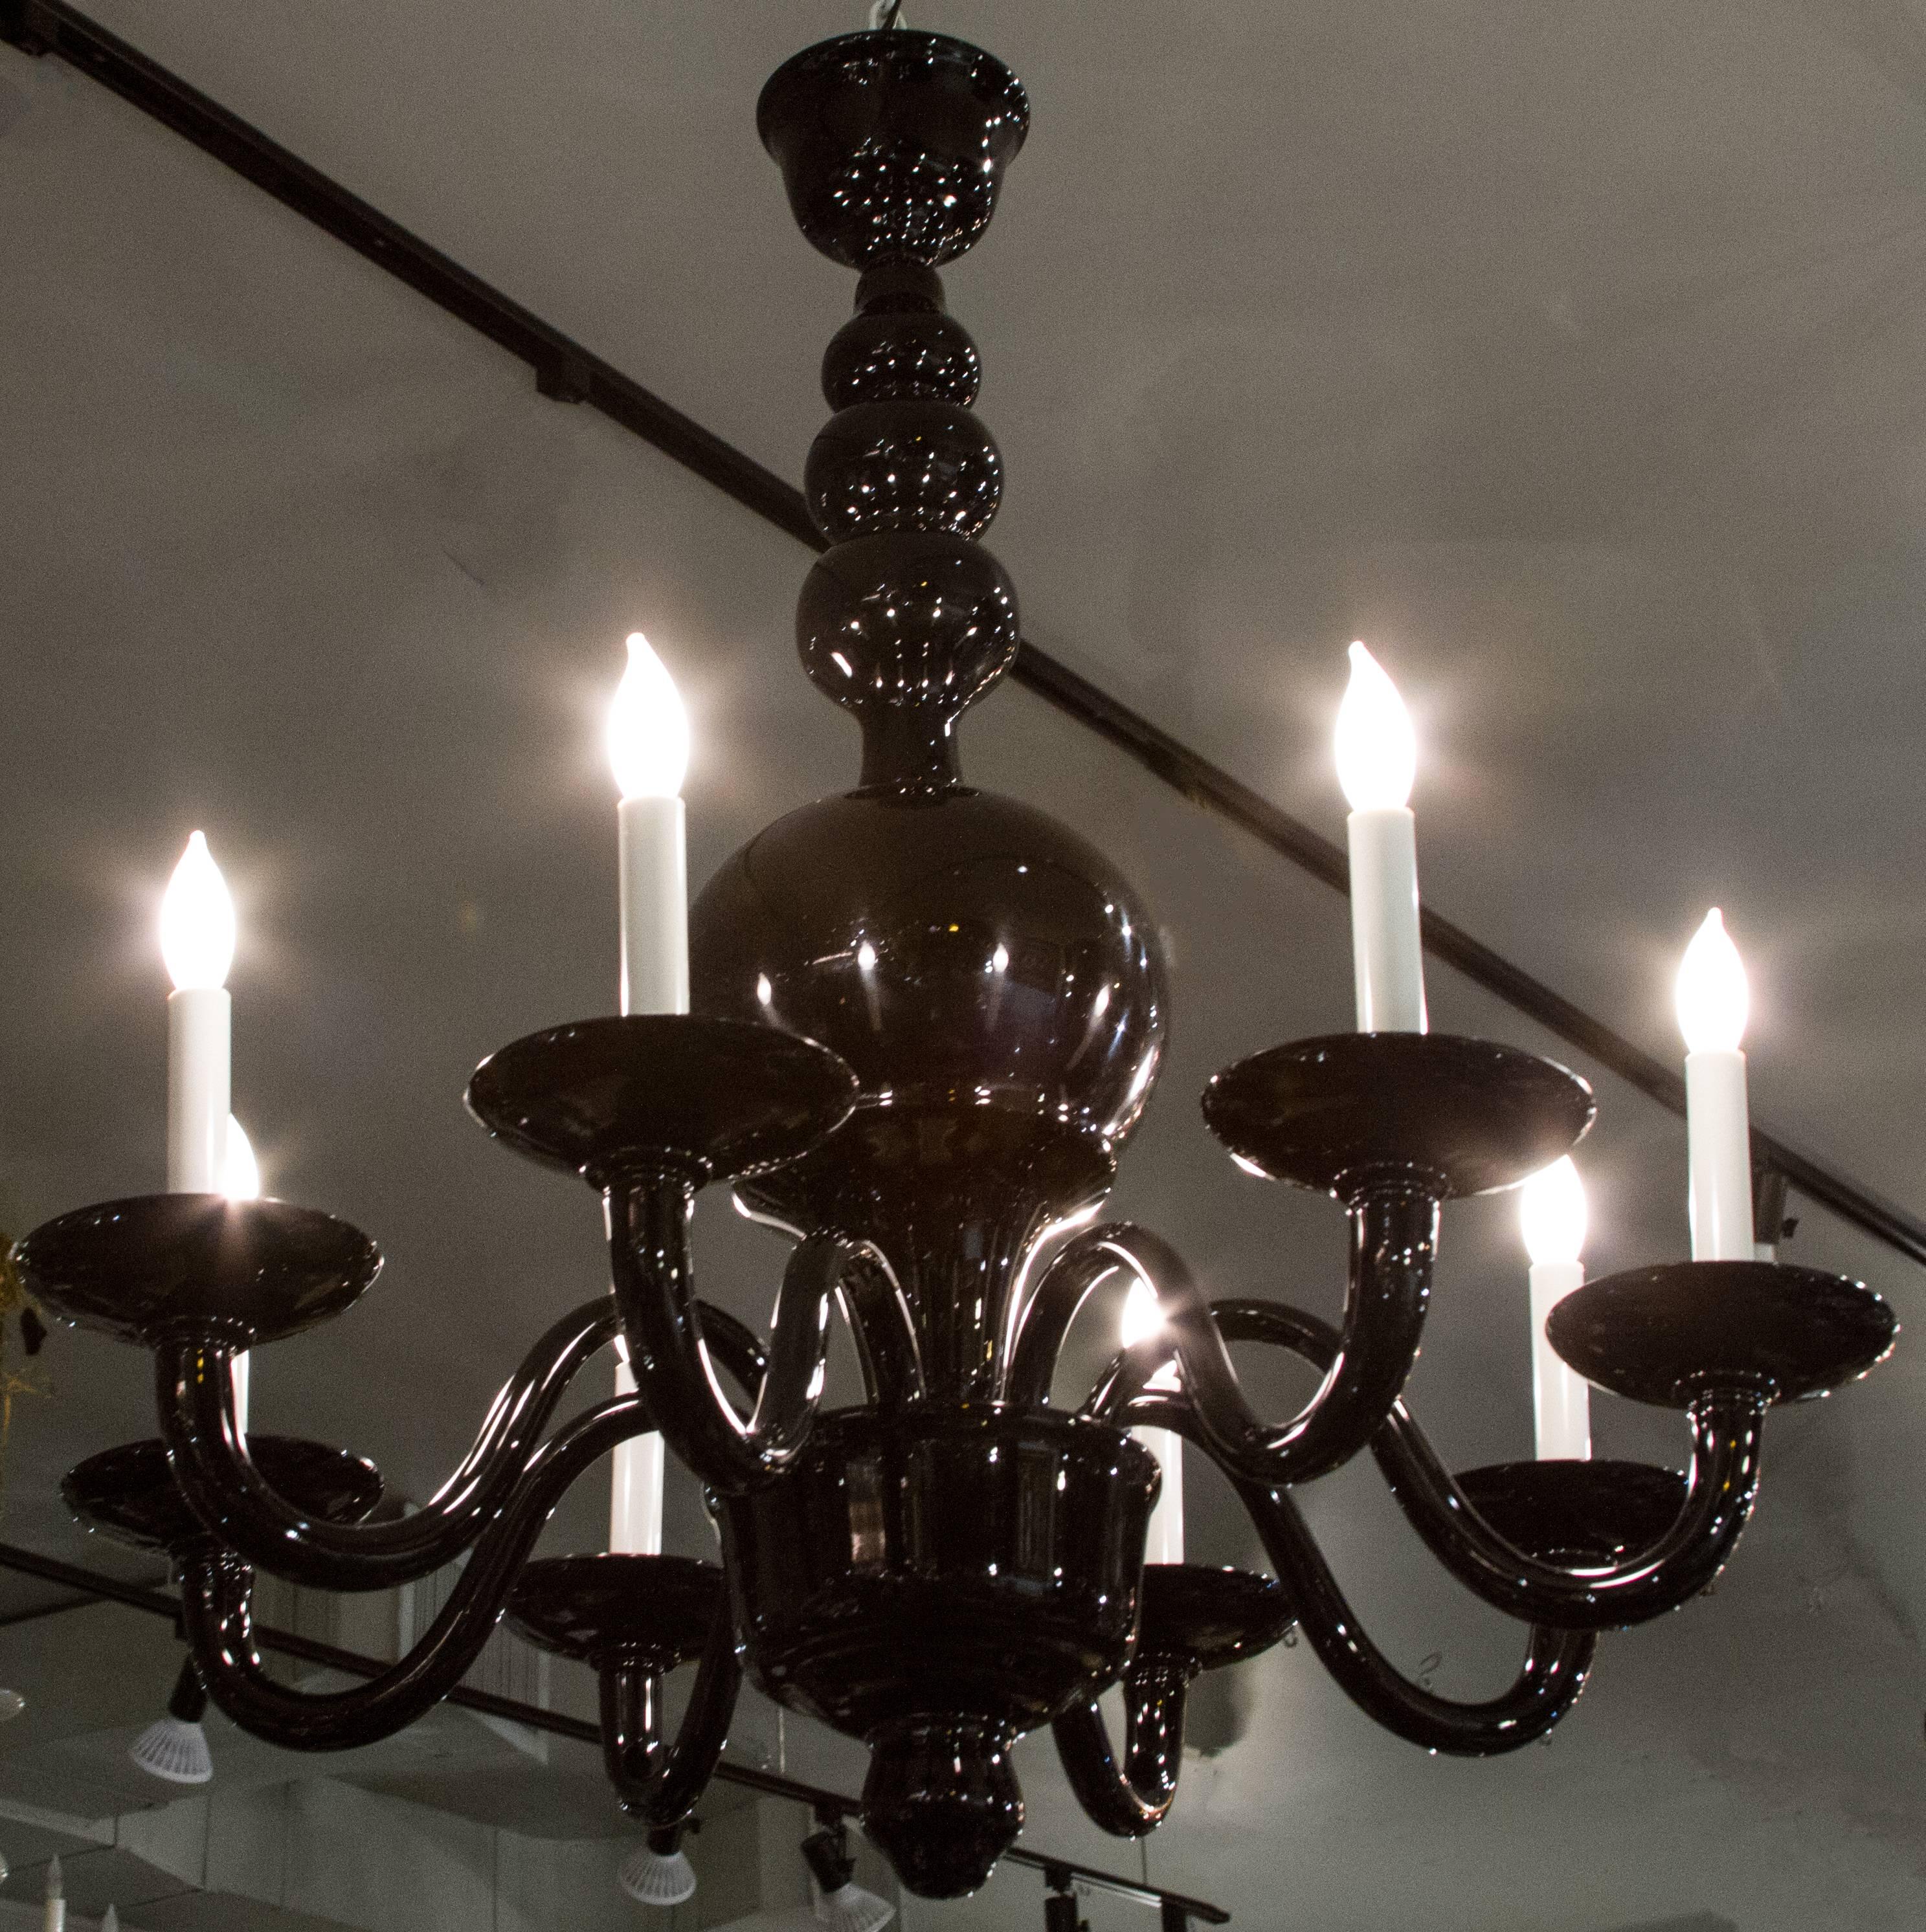 This is a handsome, clean lined eight armed chandelier.